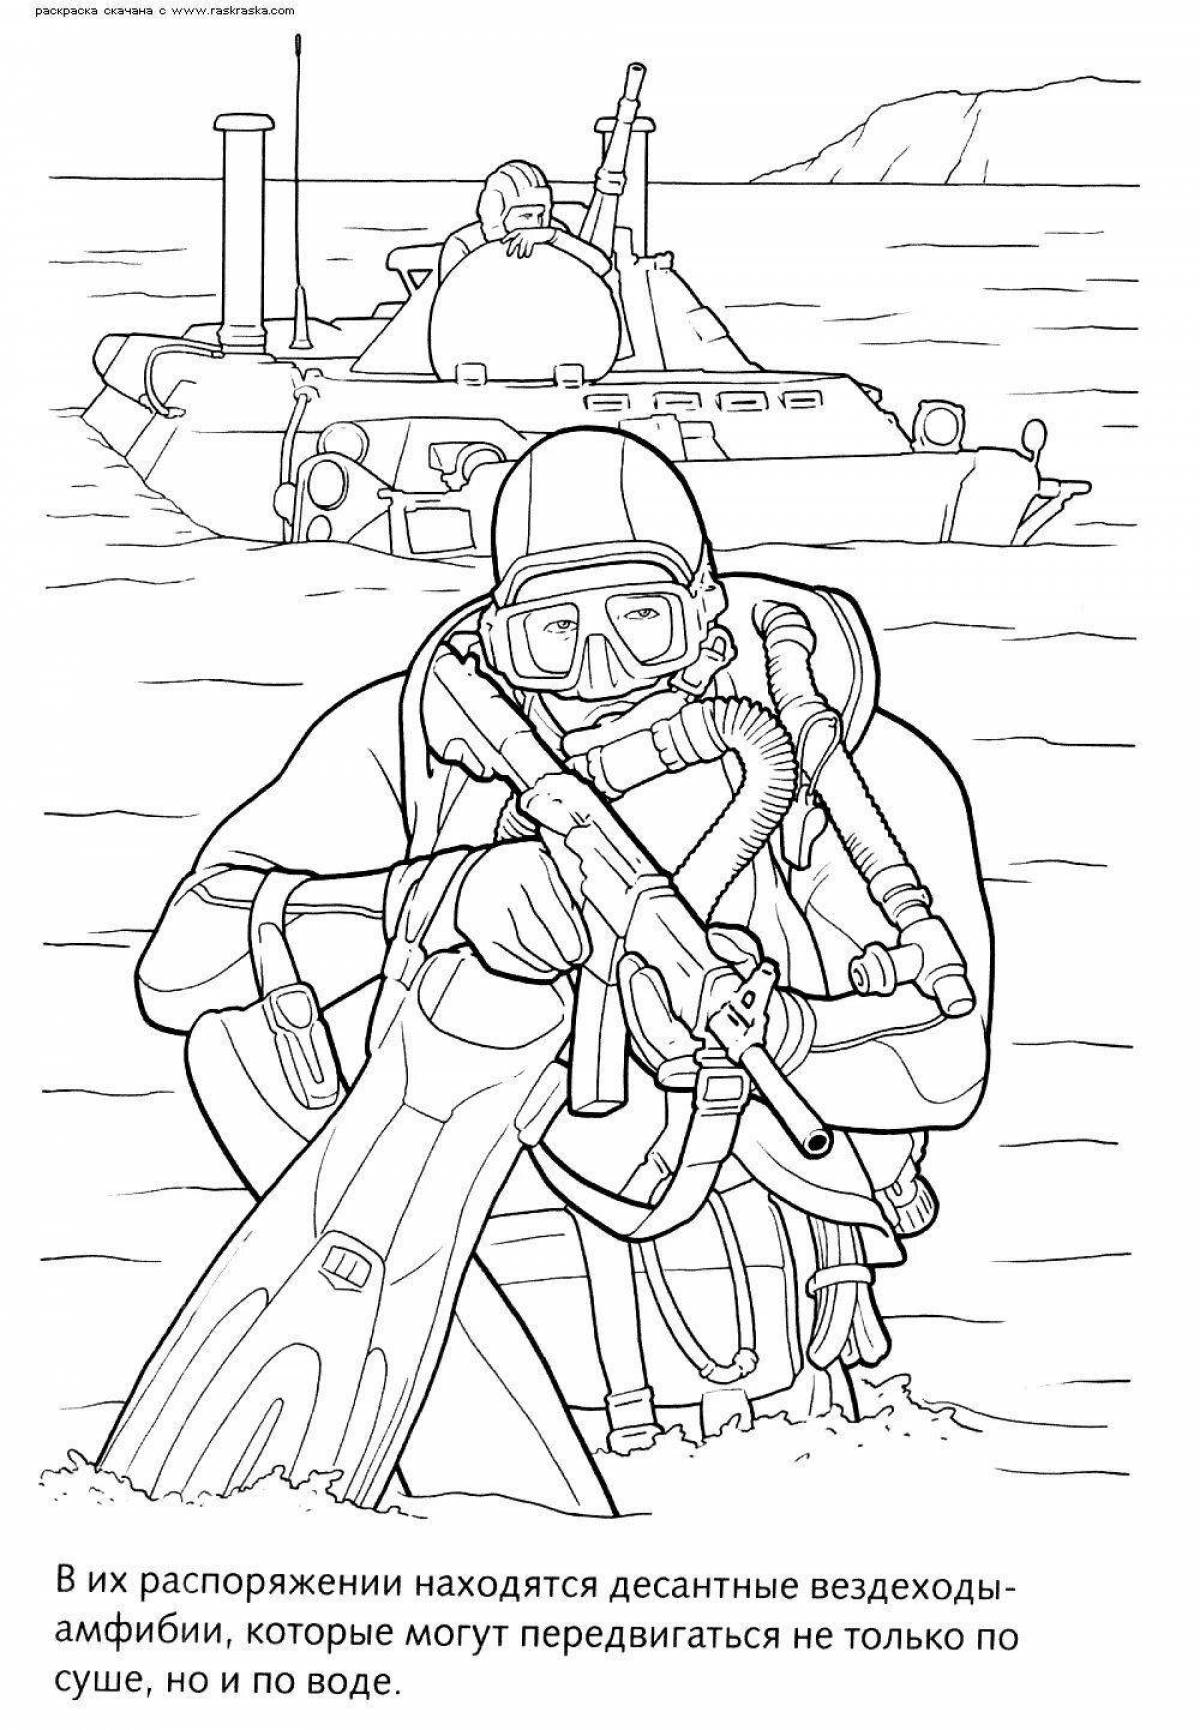 Lively 23 february coloring pages for boys